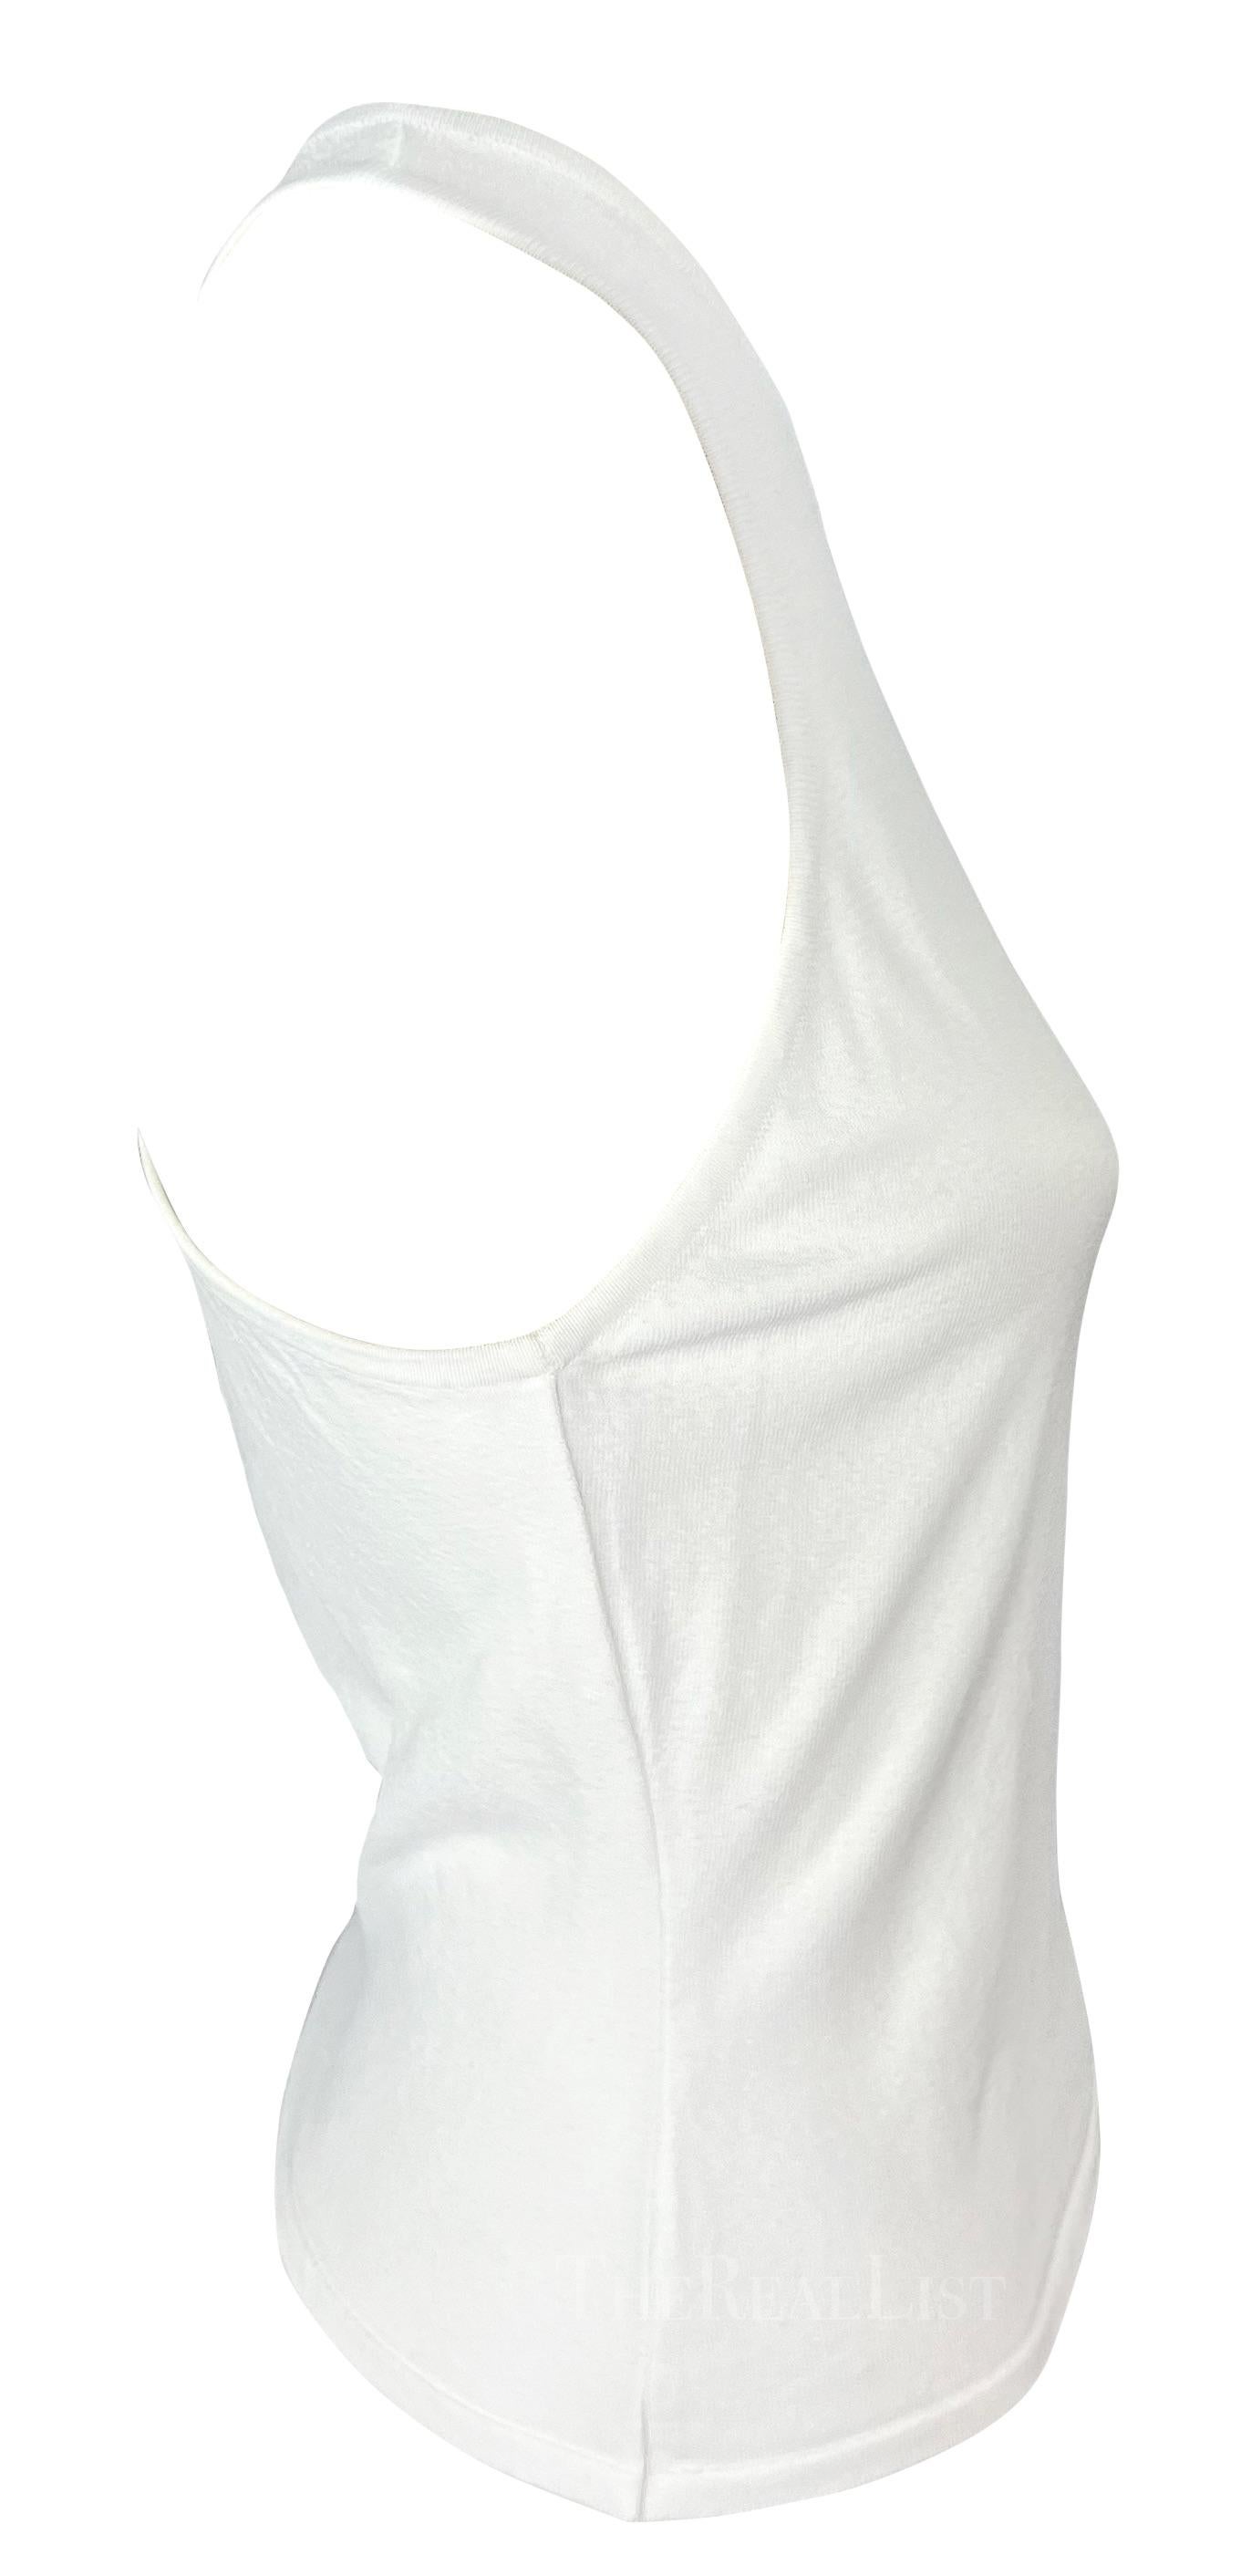 S/S 1998 Gucci by Tom Ford White Stretch Knit Racerback Tank Top In Excellent Condition For Sale In West Hollywood, CA